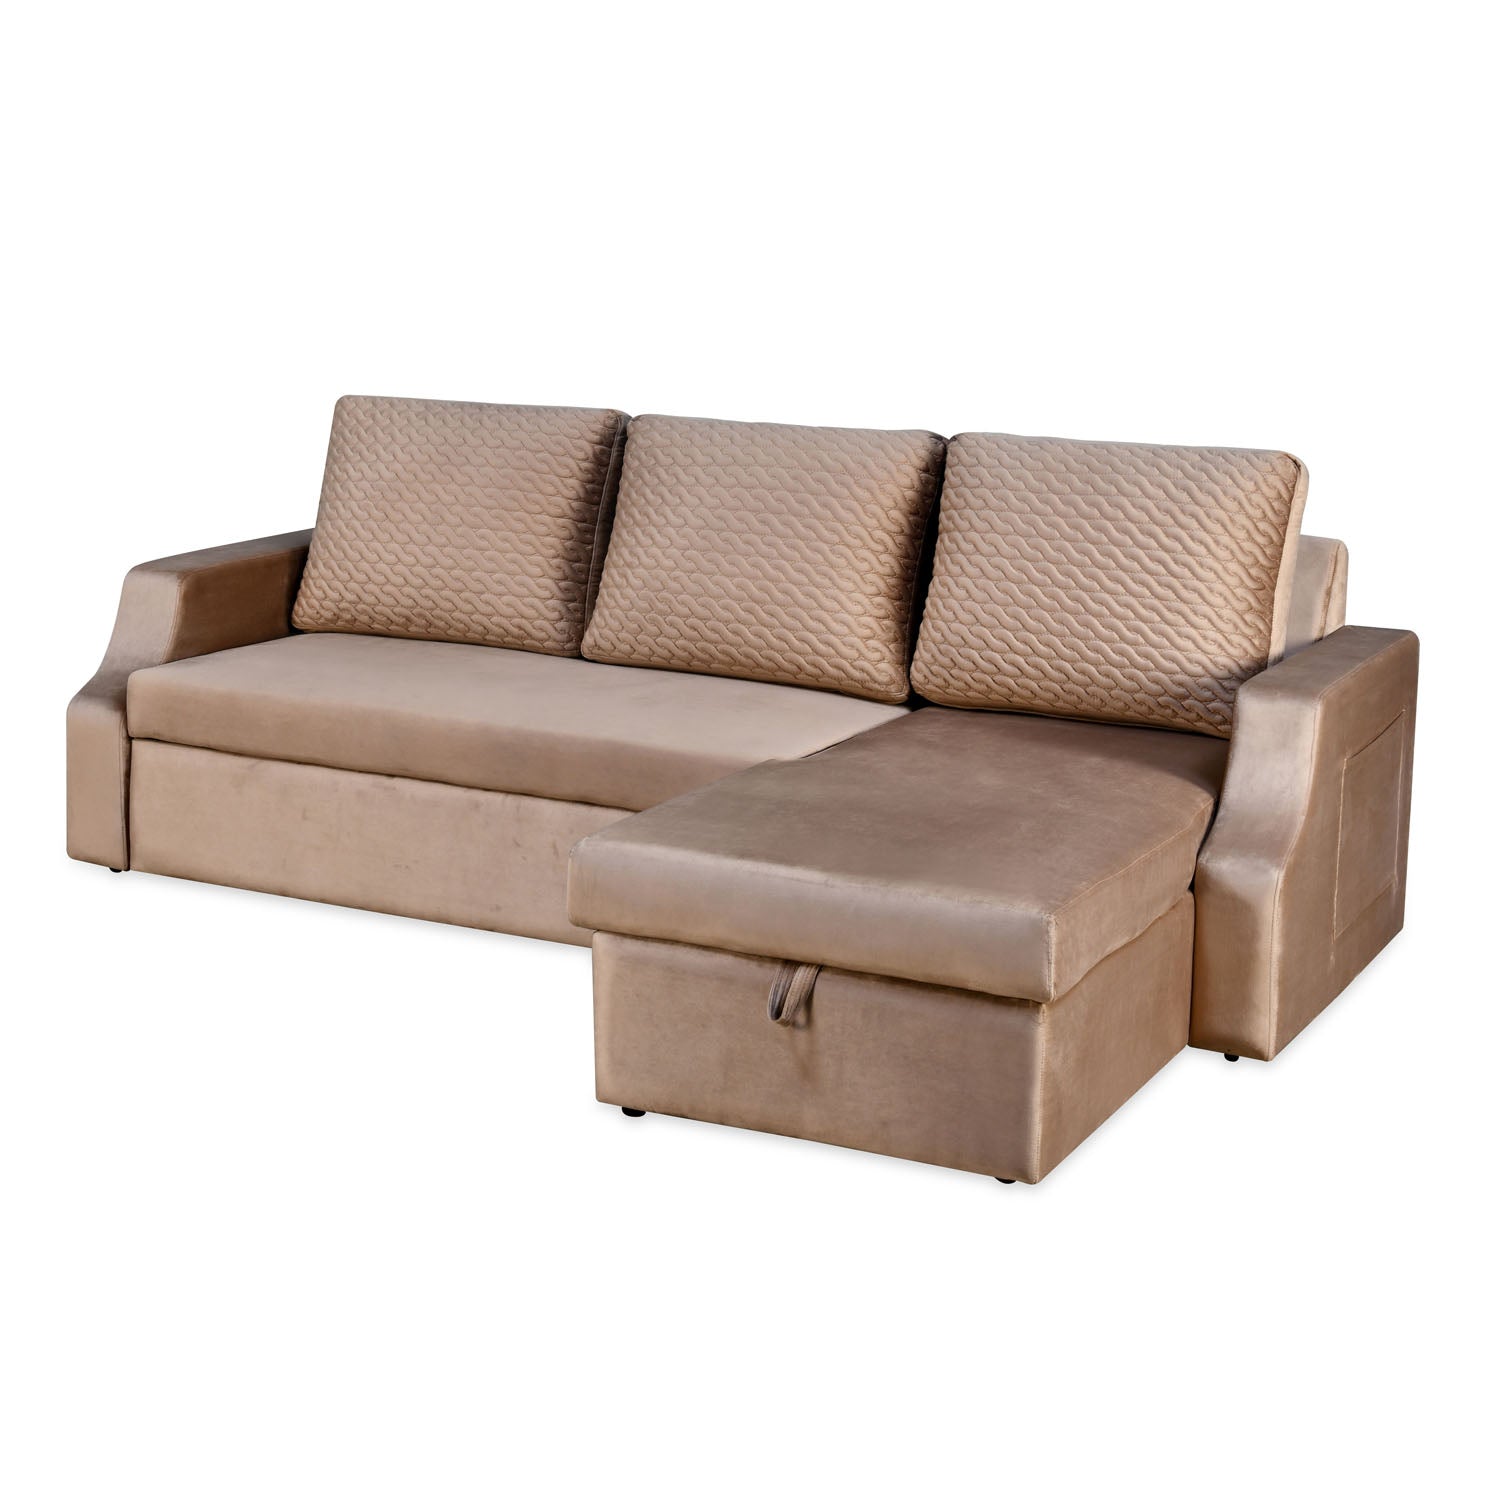 Portland LHS Sofa With Lounger & Storage (Light Brown)